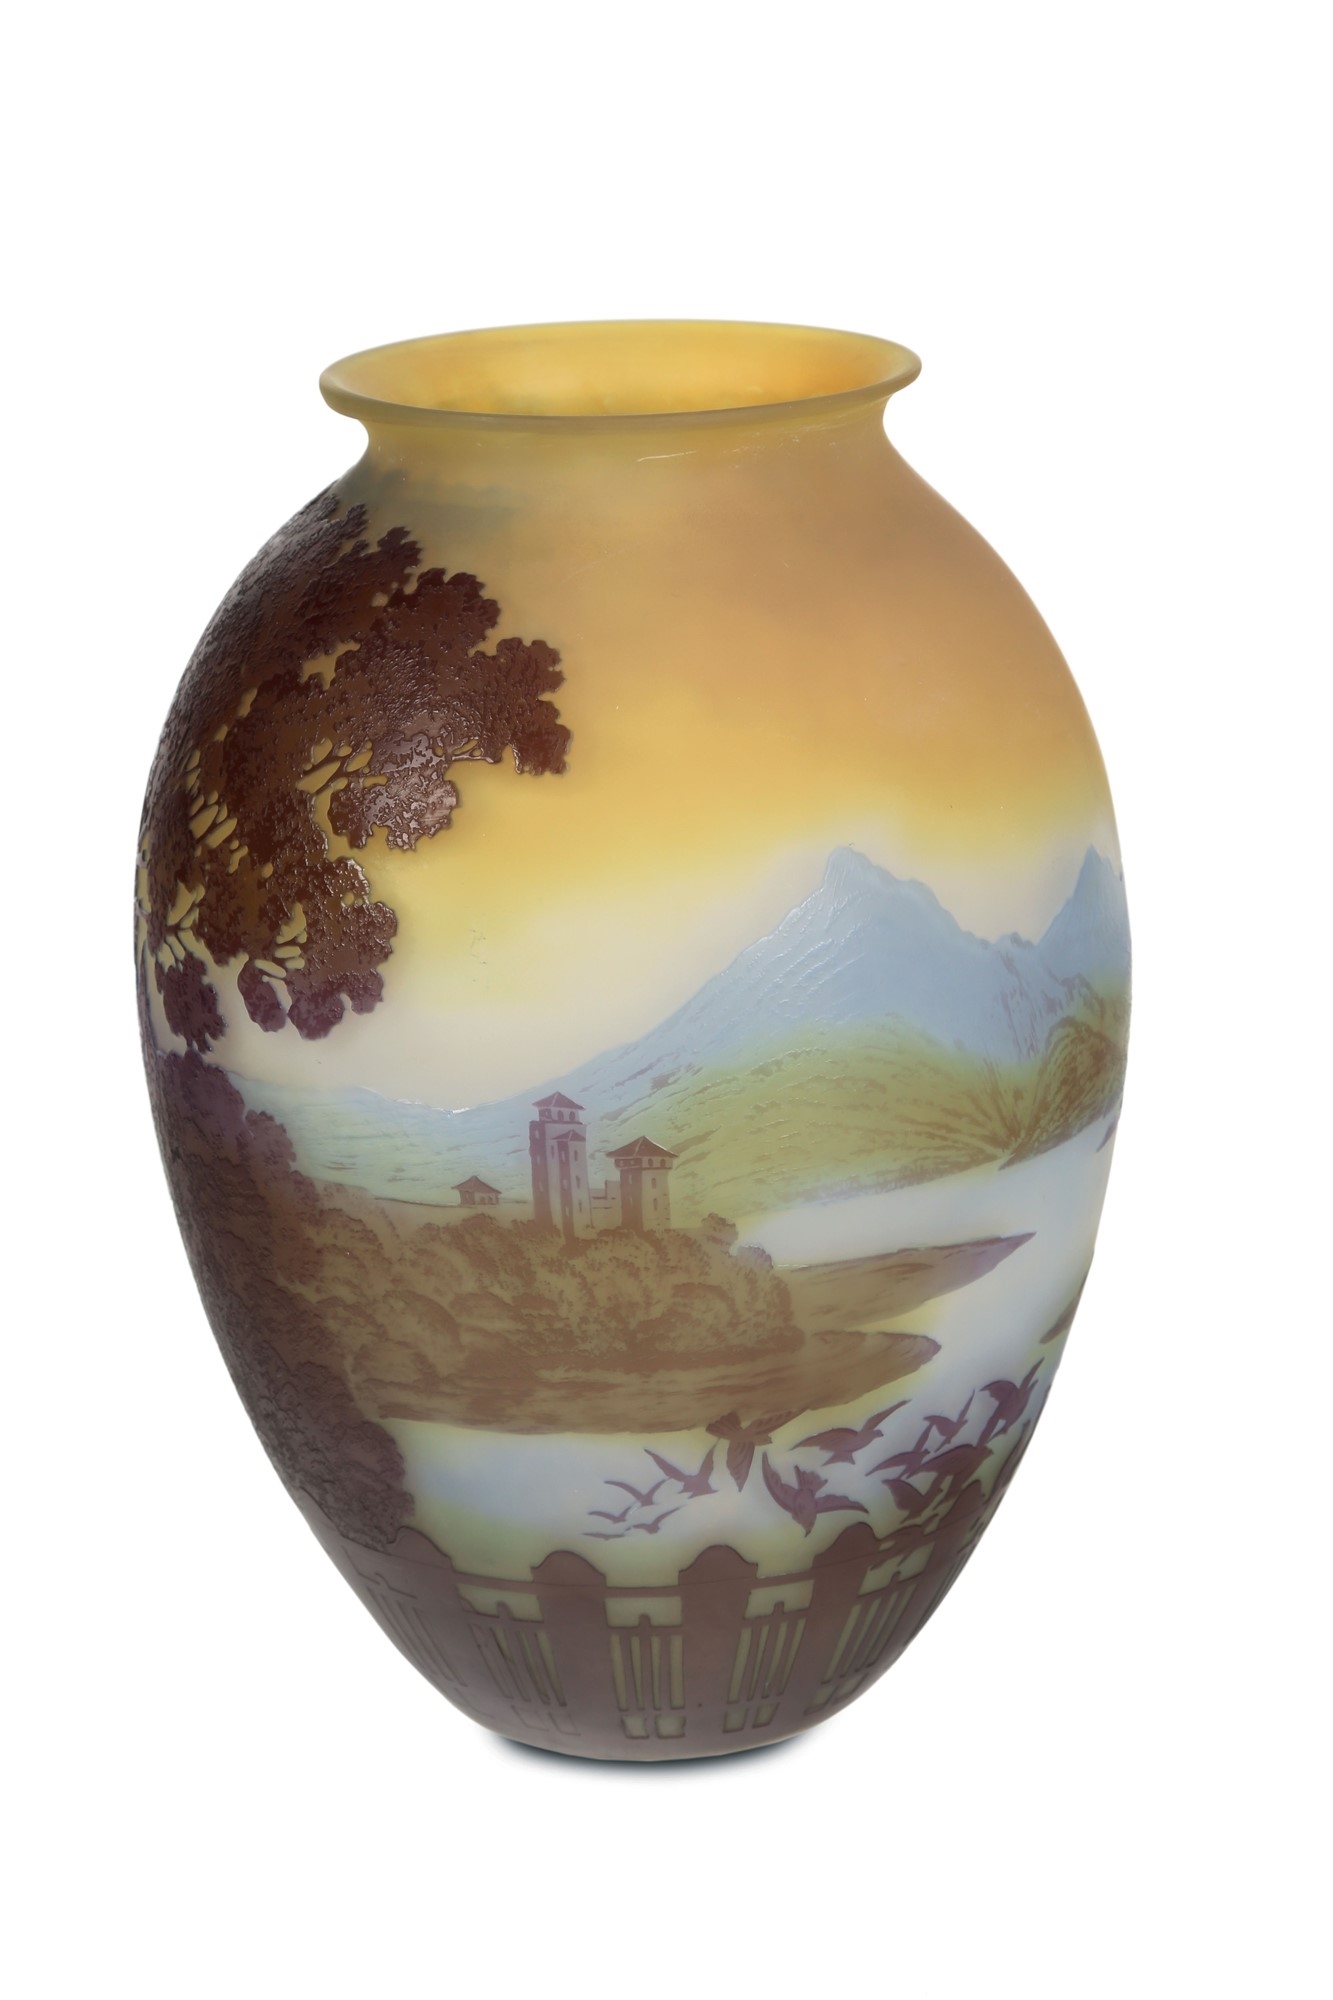 Artwork by Emile Gallé, Vaso di forma ovoidale, Made of blue and yellow glass doubled in green and brown worked with a cameo landscape decoration